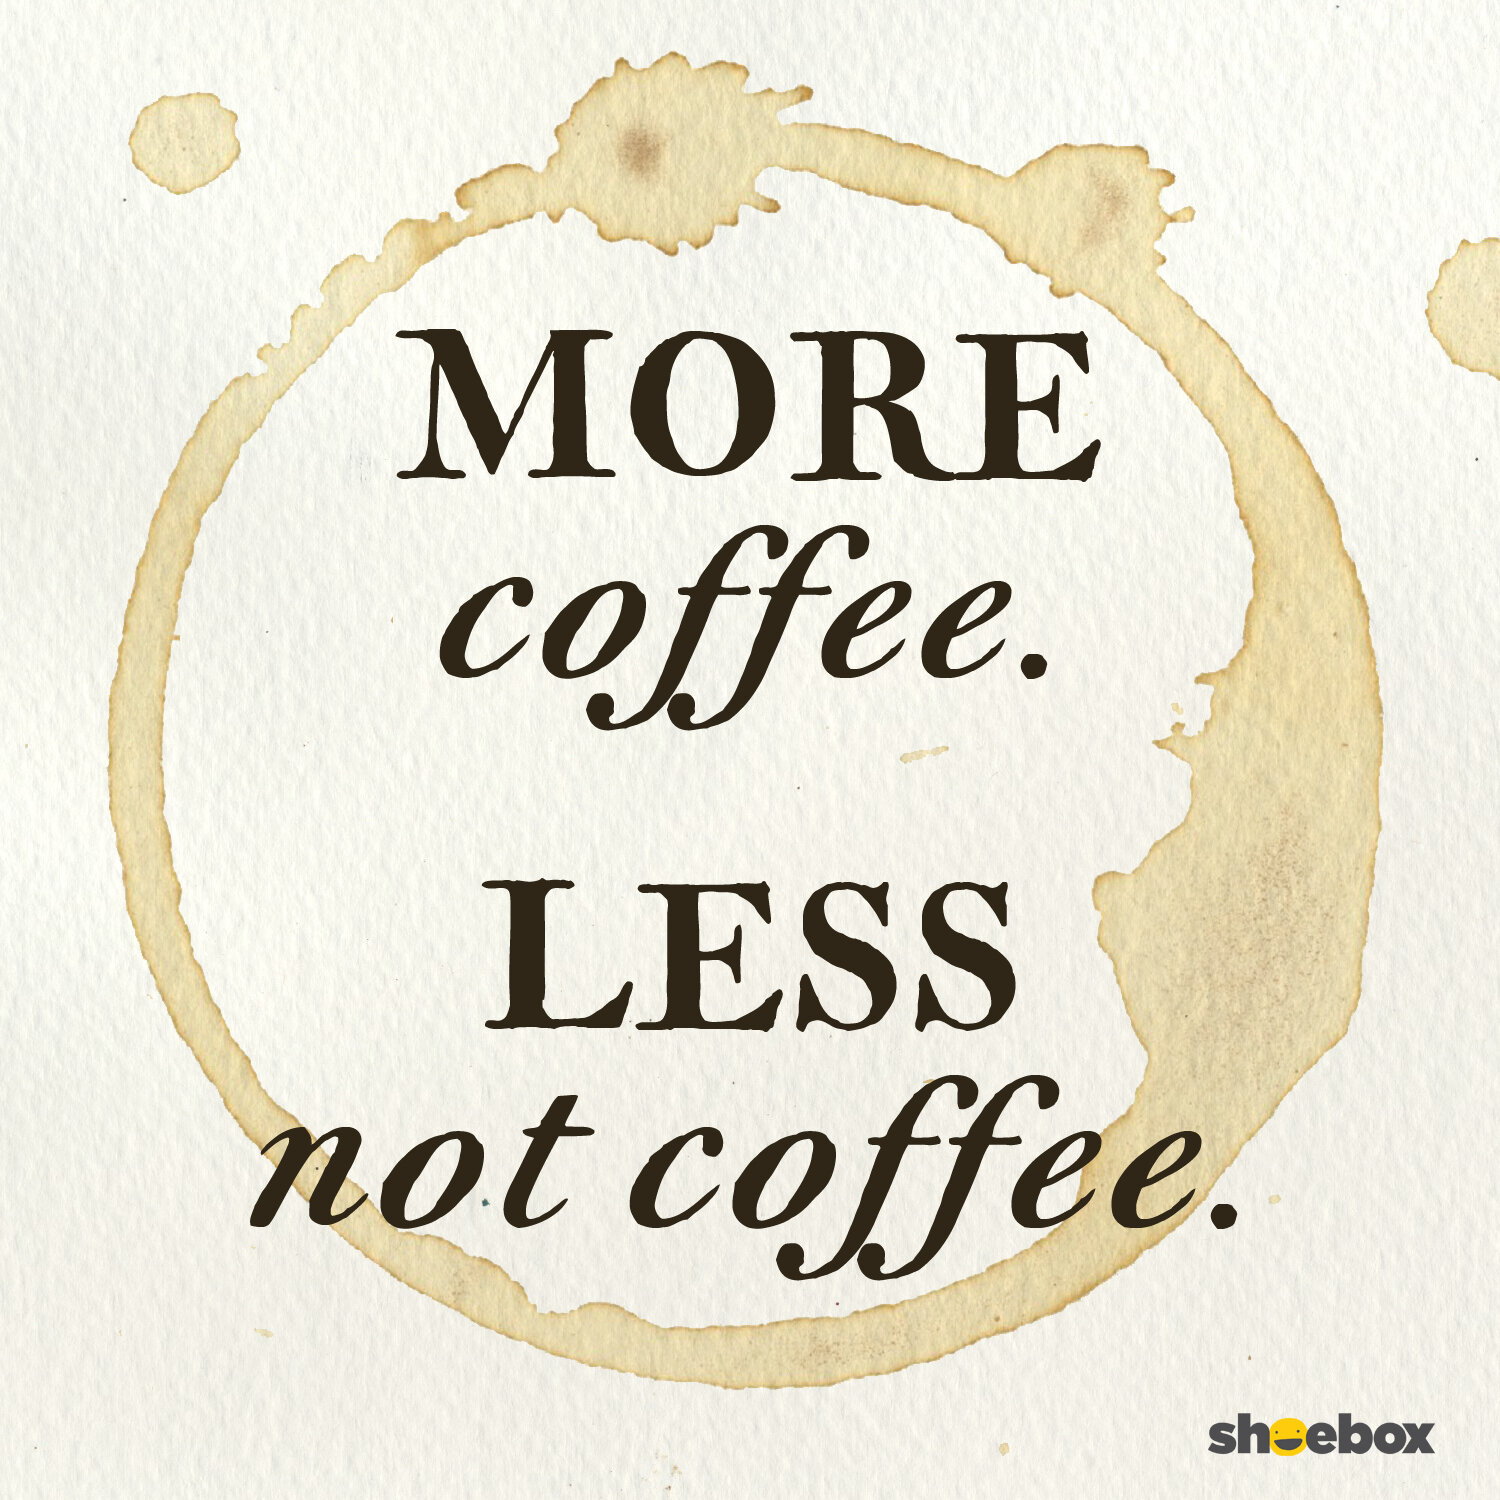 Coffeequotes-more-coffee(brianG).jpg